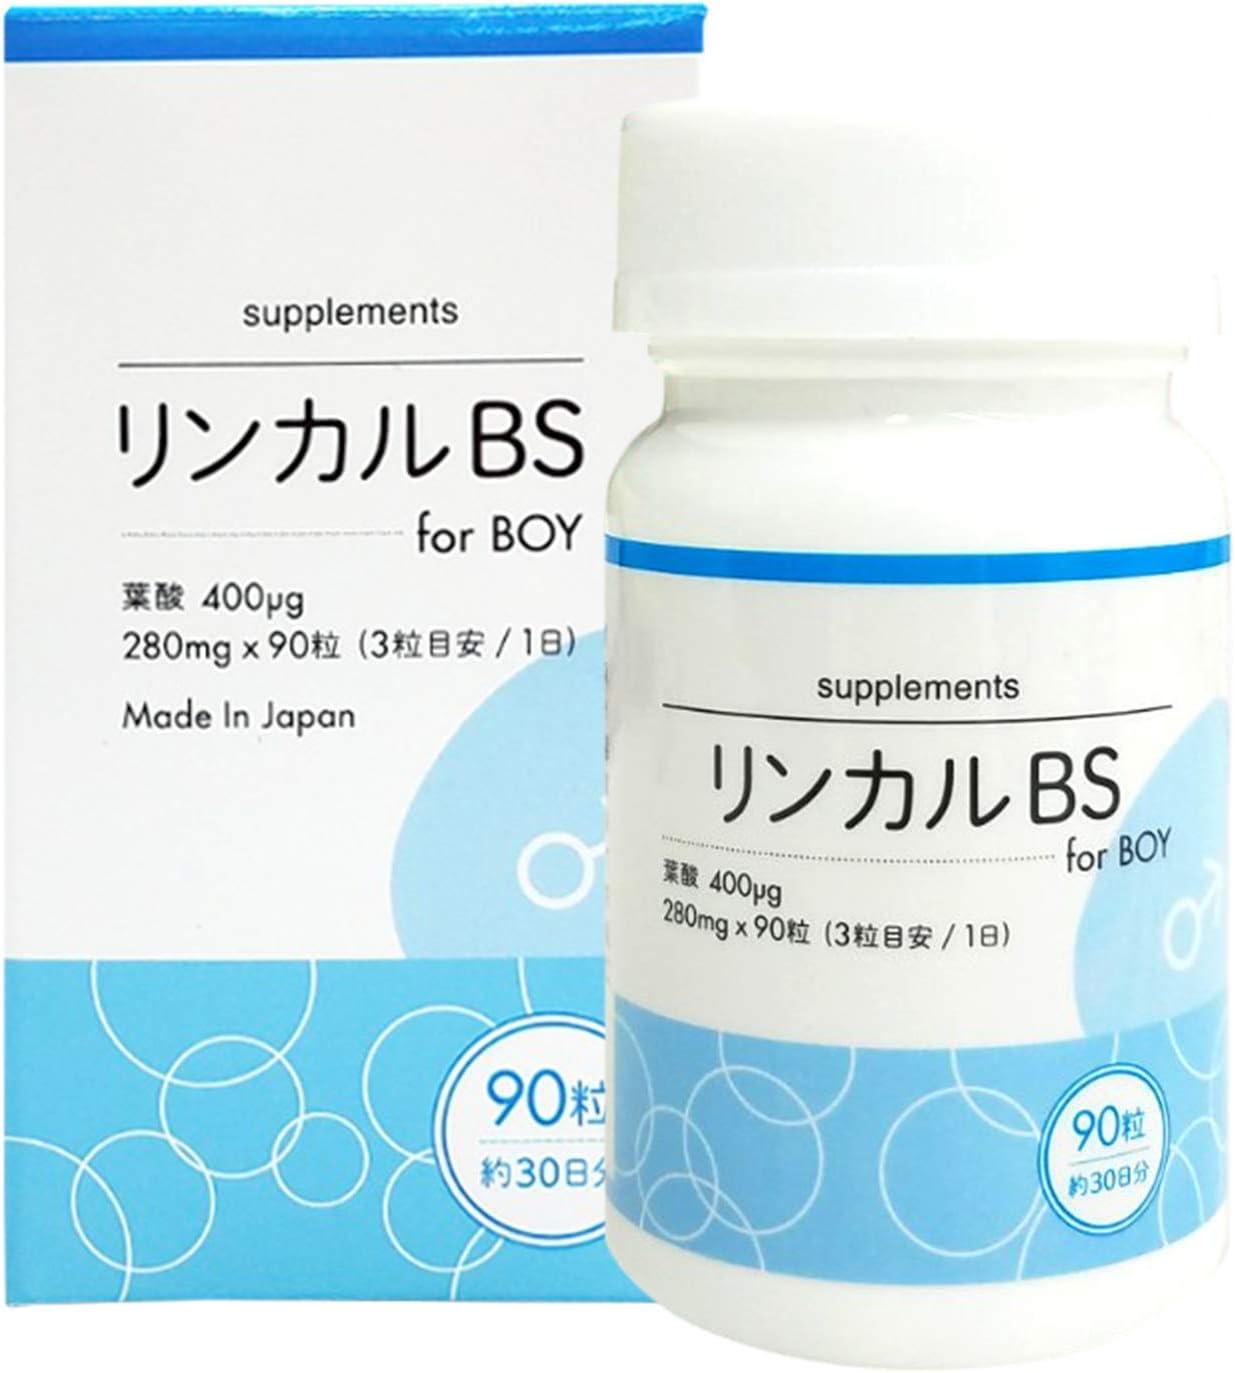 Baby Support 【男の子用】リンカルBS forBoy 日本製 葉酸400?配合 30日分280mg×90粒入り